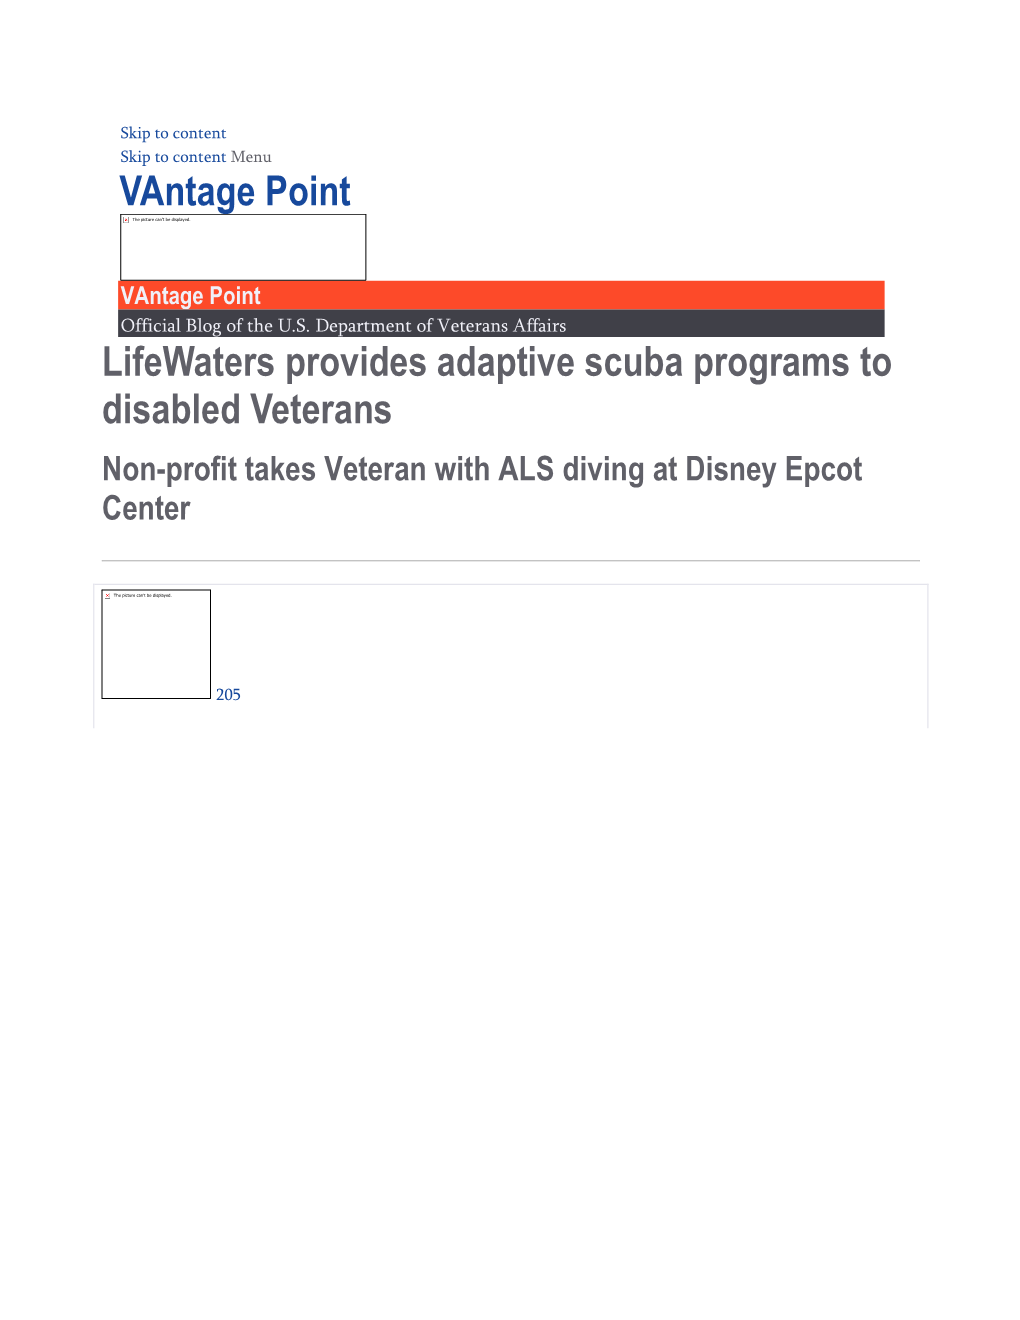 Lifewaters Provides Adaptive Scuba Programs to Disabled Veterans Non-Profit Takes Veteran with ALS Diving at Disney Epcot Center